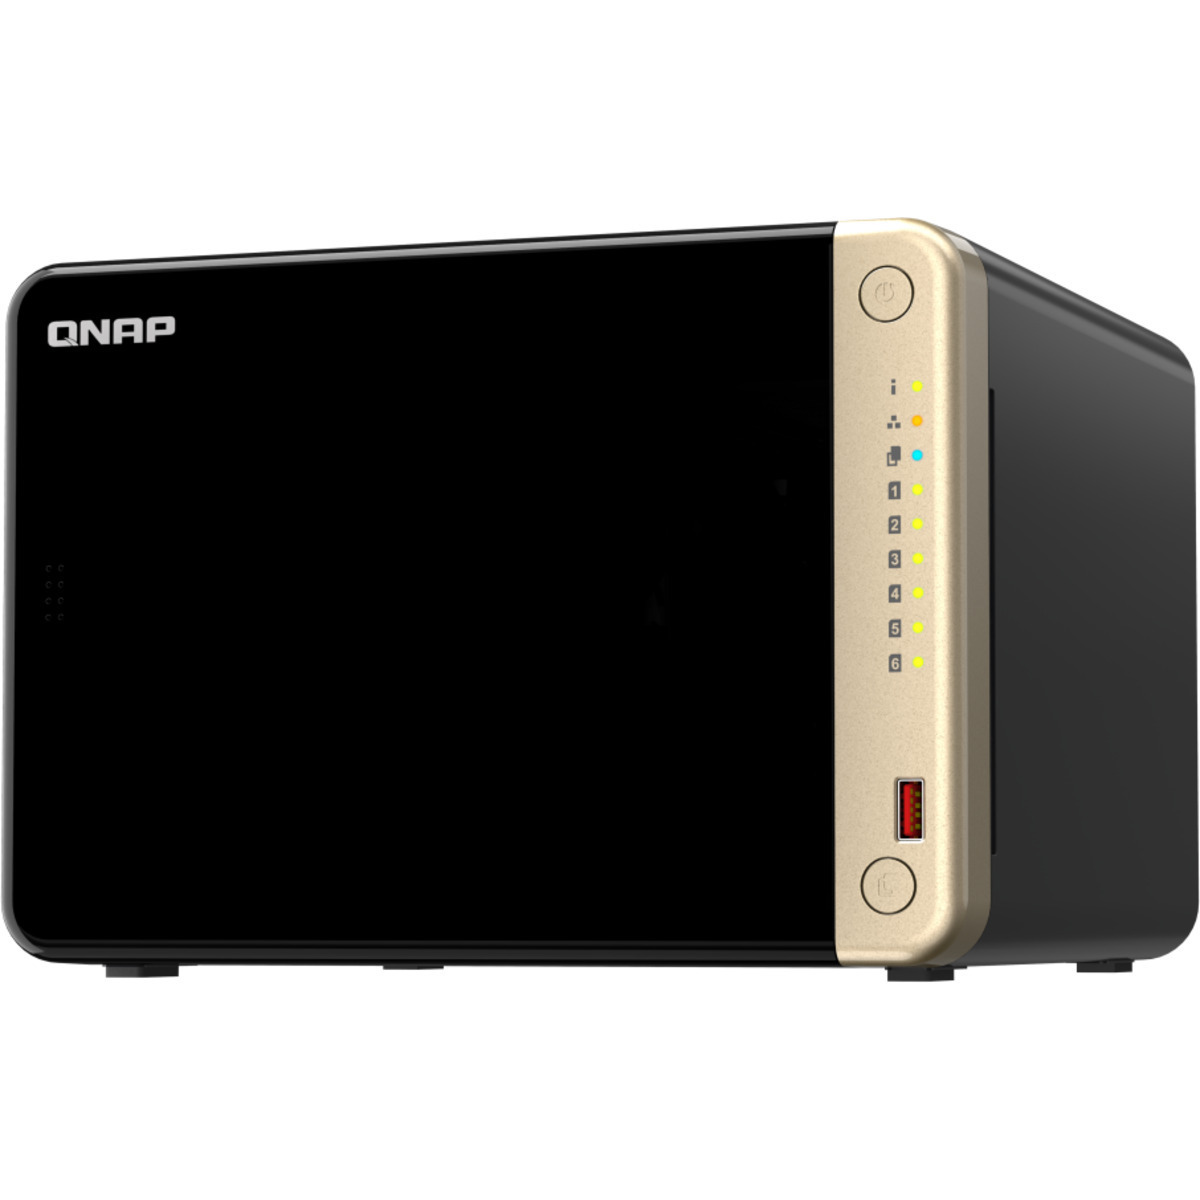 QNAP TS-664 88tb 6-Bay Desktop Multimedia / Power User / Business NAS - Network Attached Storage Device 4x22tb Seagate IronWolf Pro ST22000NT001 3.5 7200rpm SATA 6Gb/s HDD NAS Class Drives Installed - Burn-In Tested TS-664